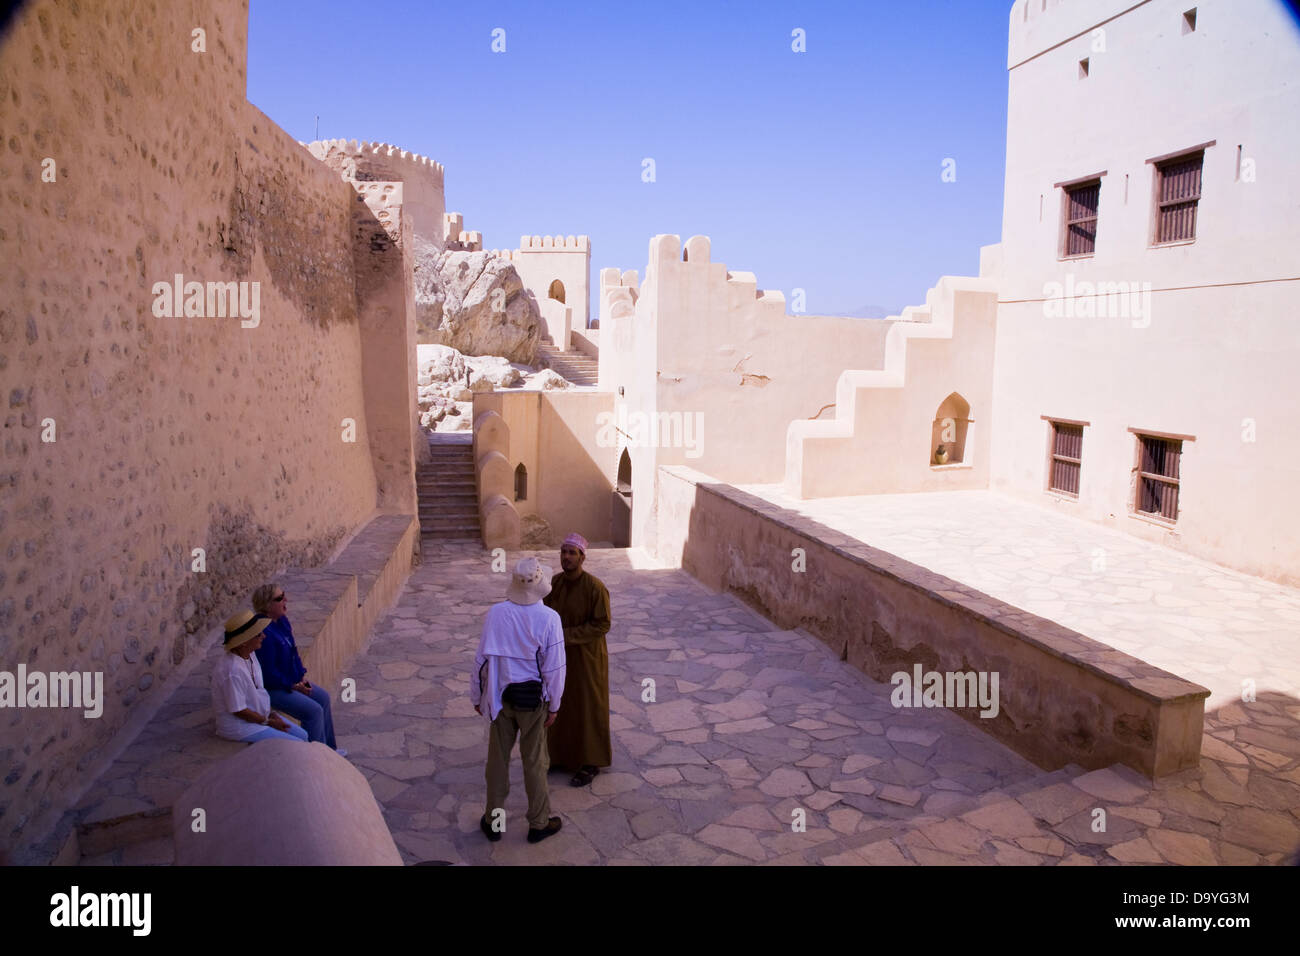 A tour group explores the well-preserved Fort of Nakhal, Nakhal, Oman Stock Photo